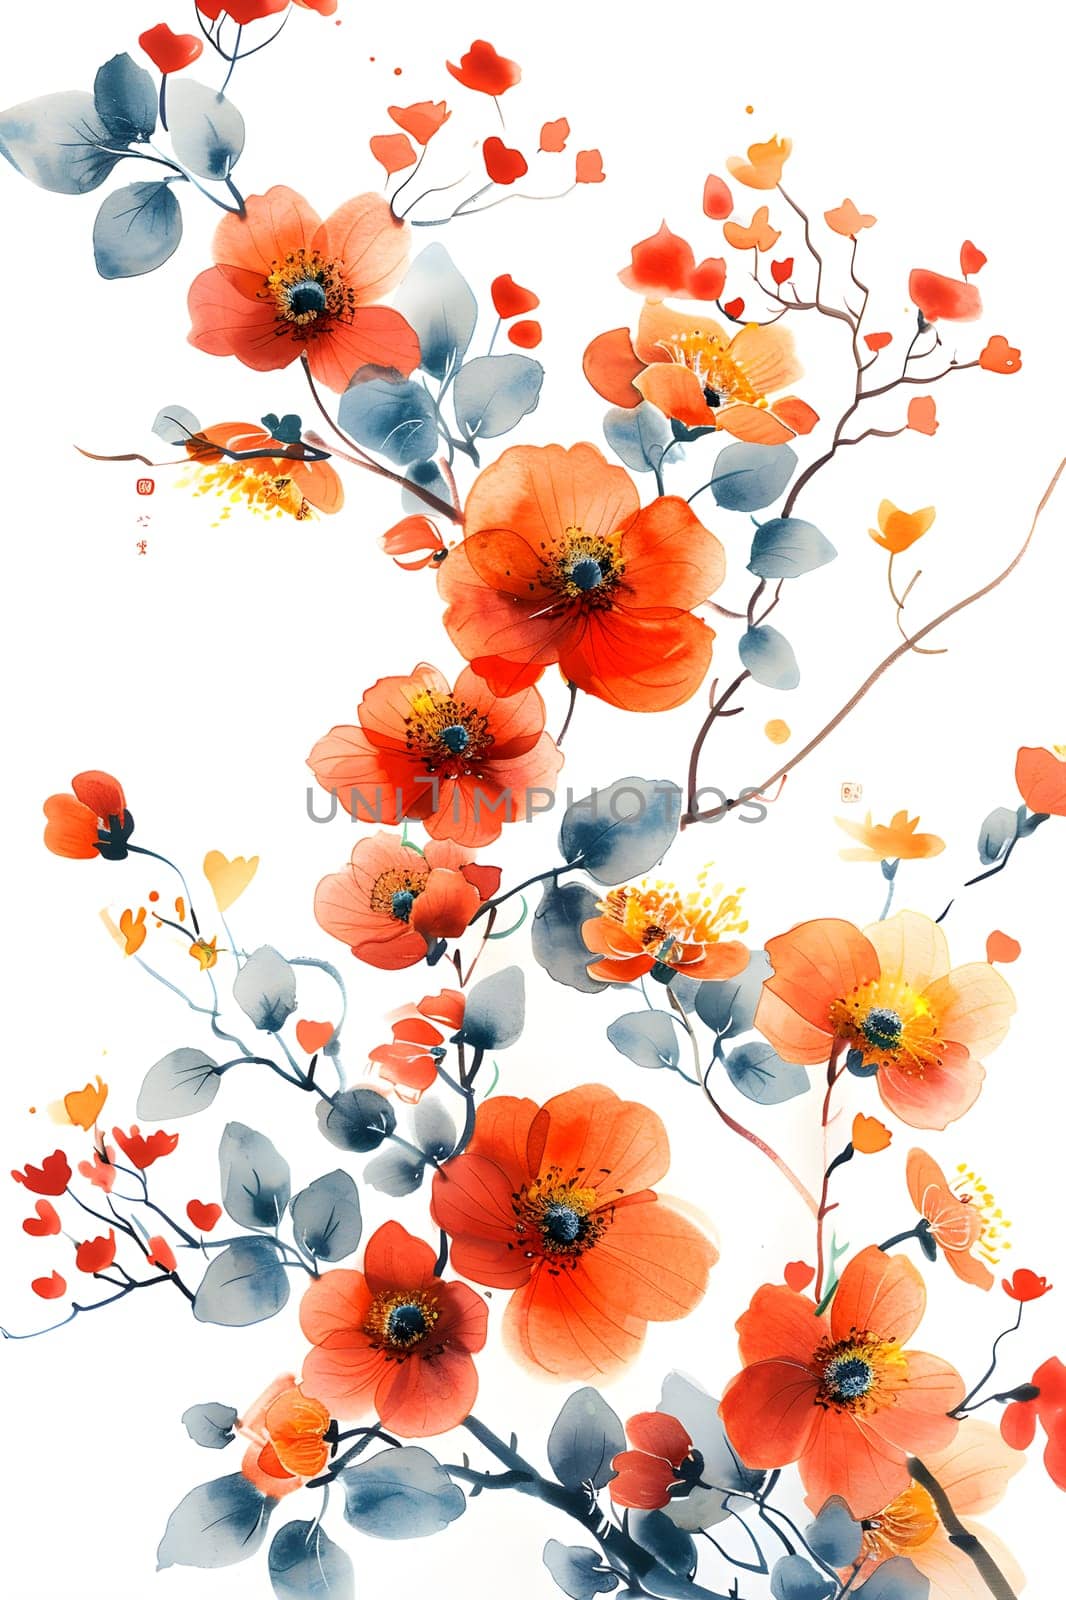 Vivid watercolor art of red flowers and blue leaves on a white background by Nadtochiy